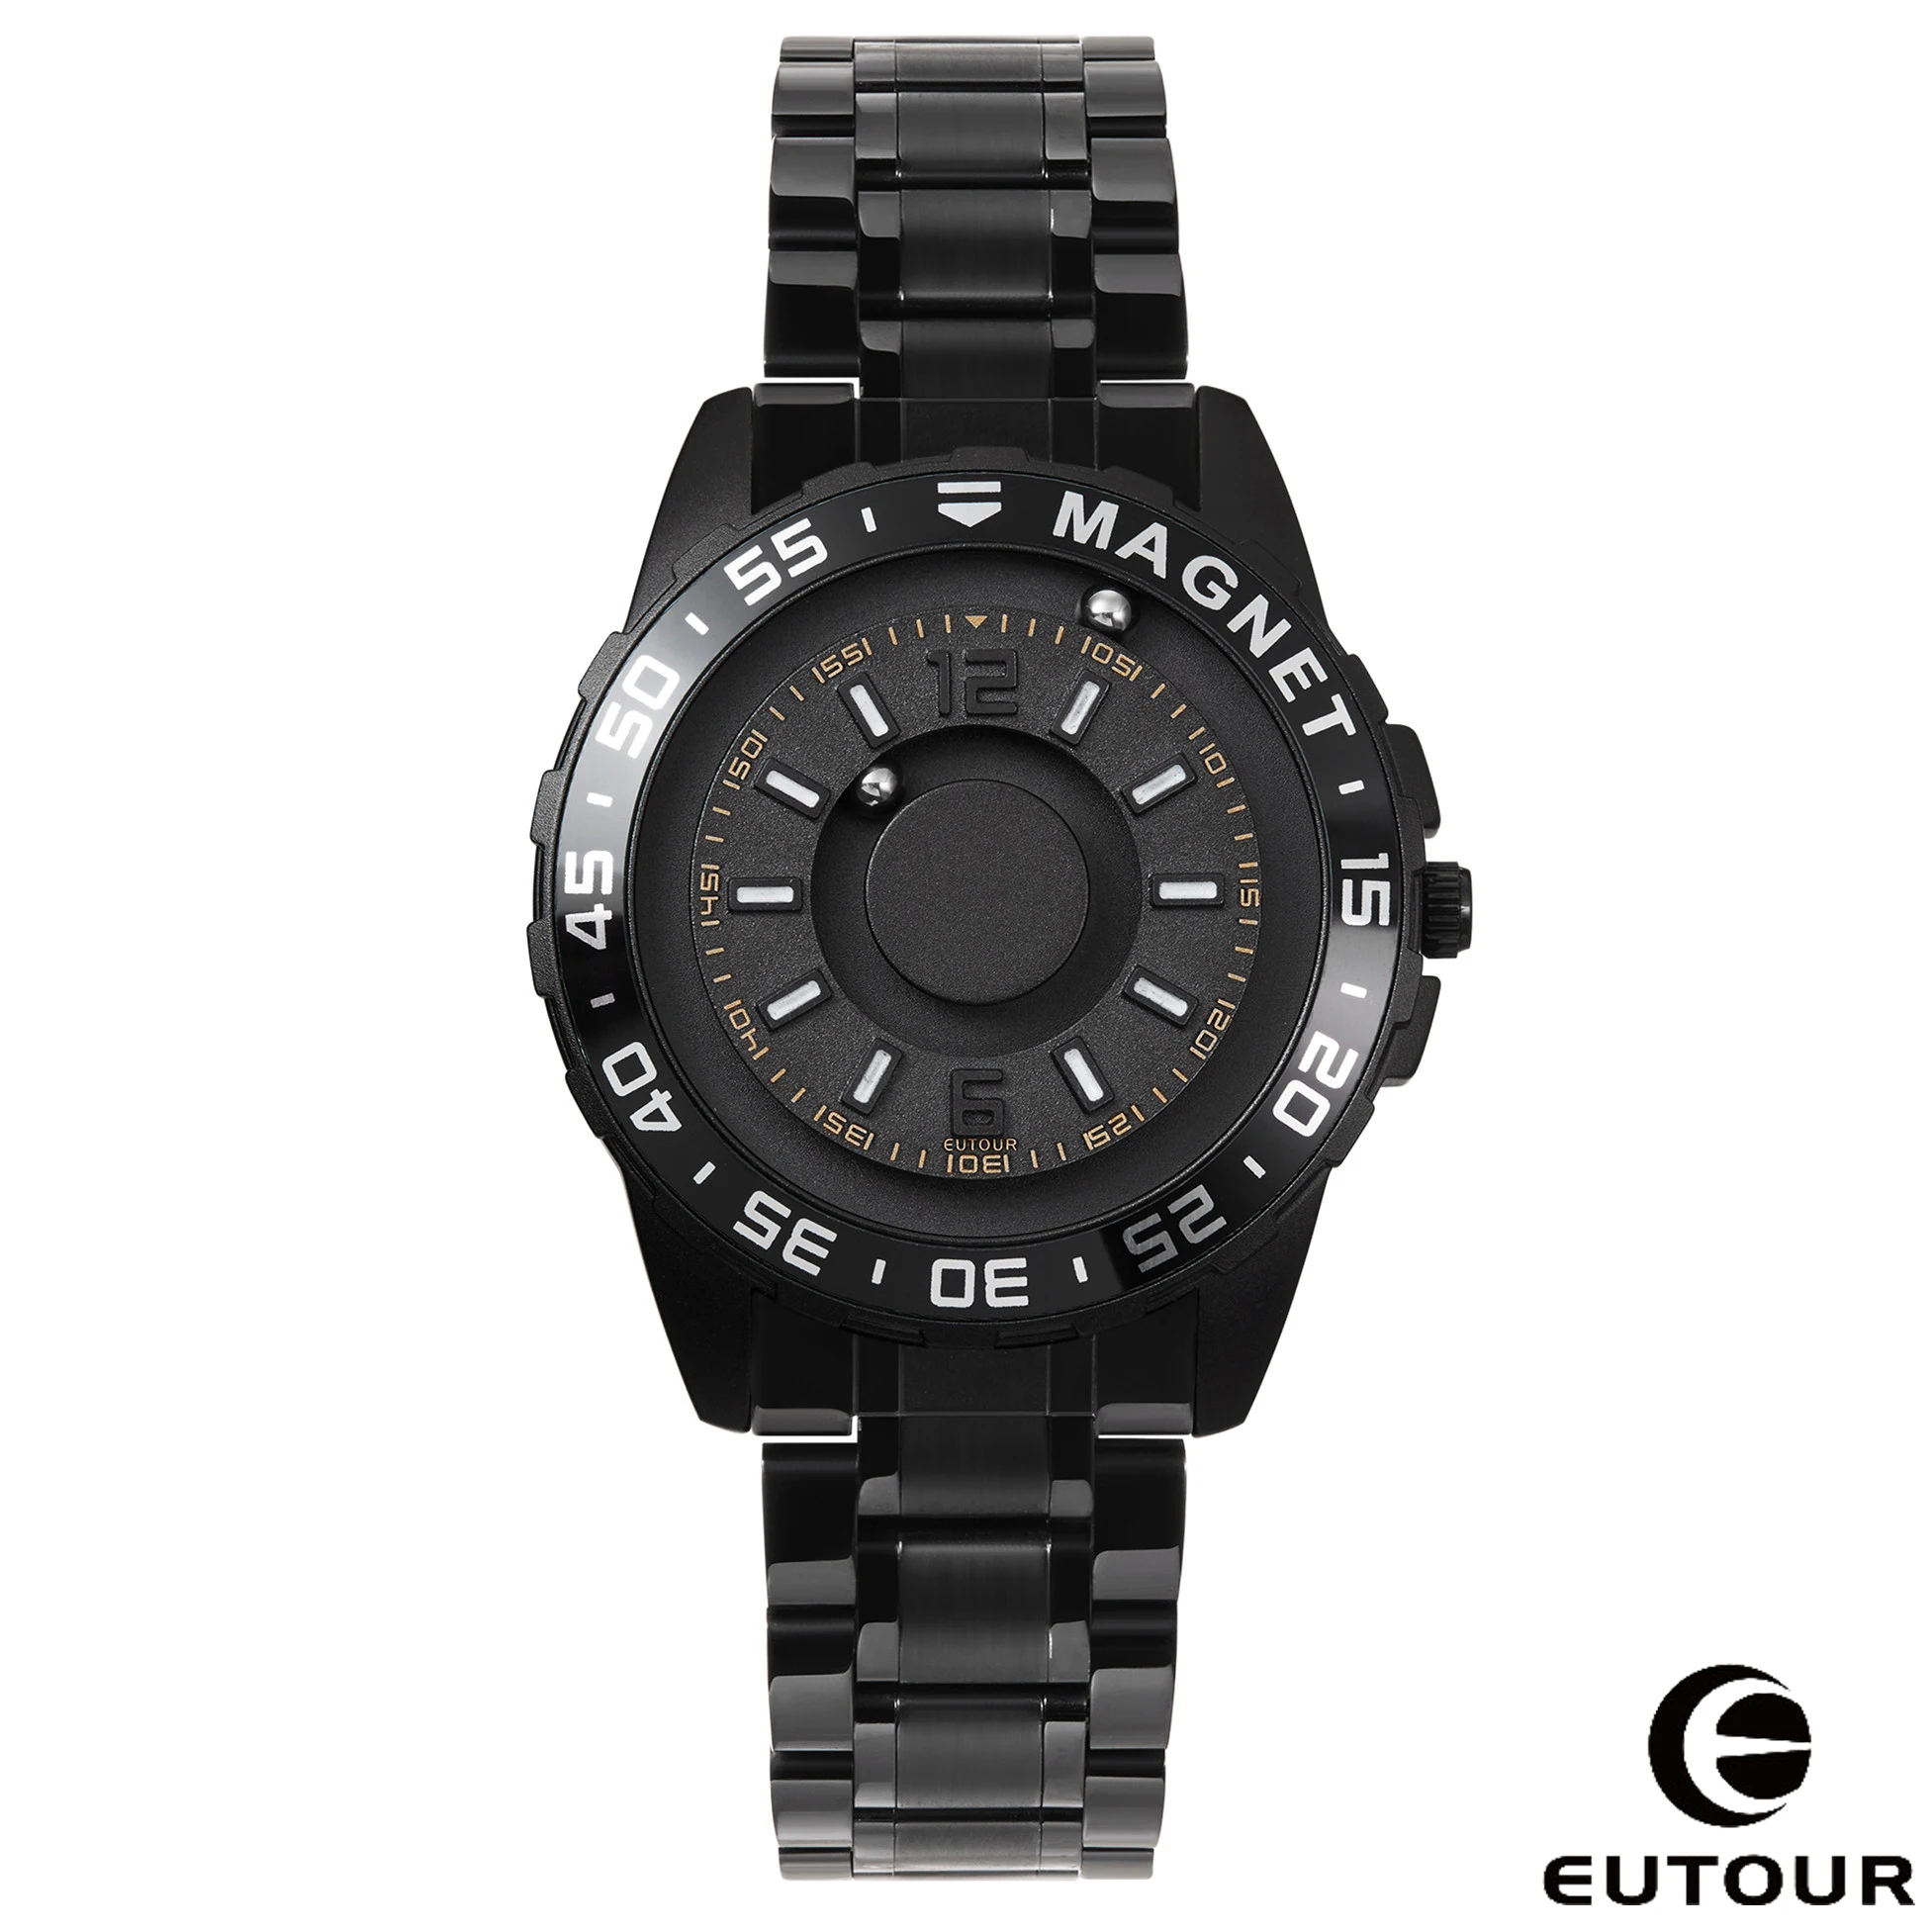 

Eutour innovative magnetic metal watch men's high end fashion quartz simple watch stainless steel strap